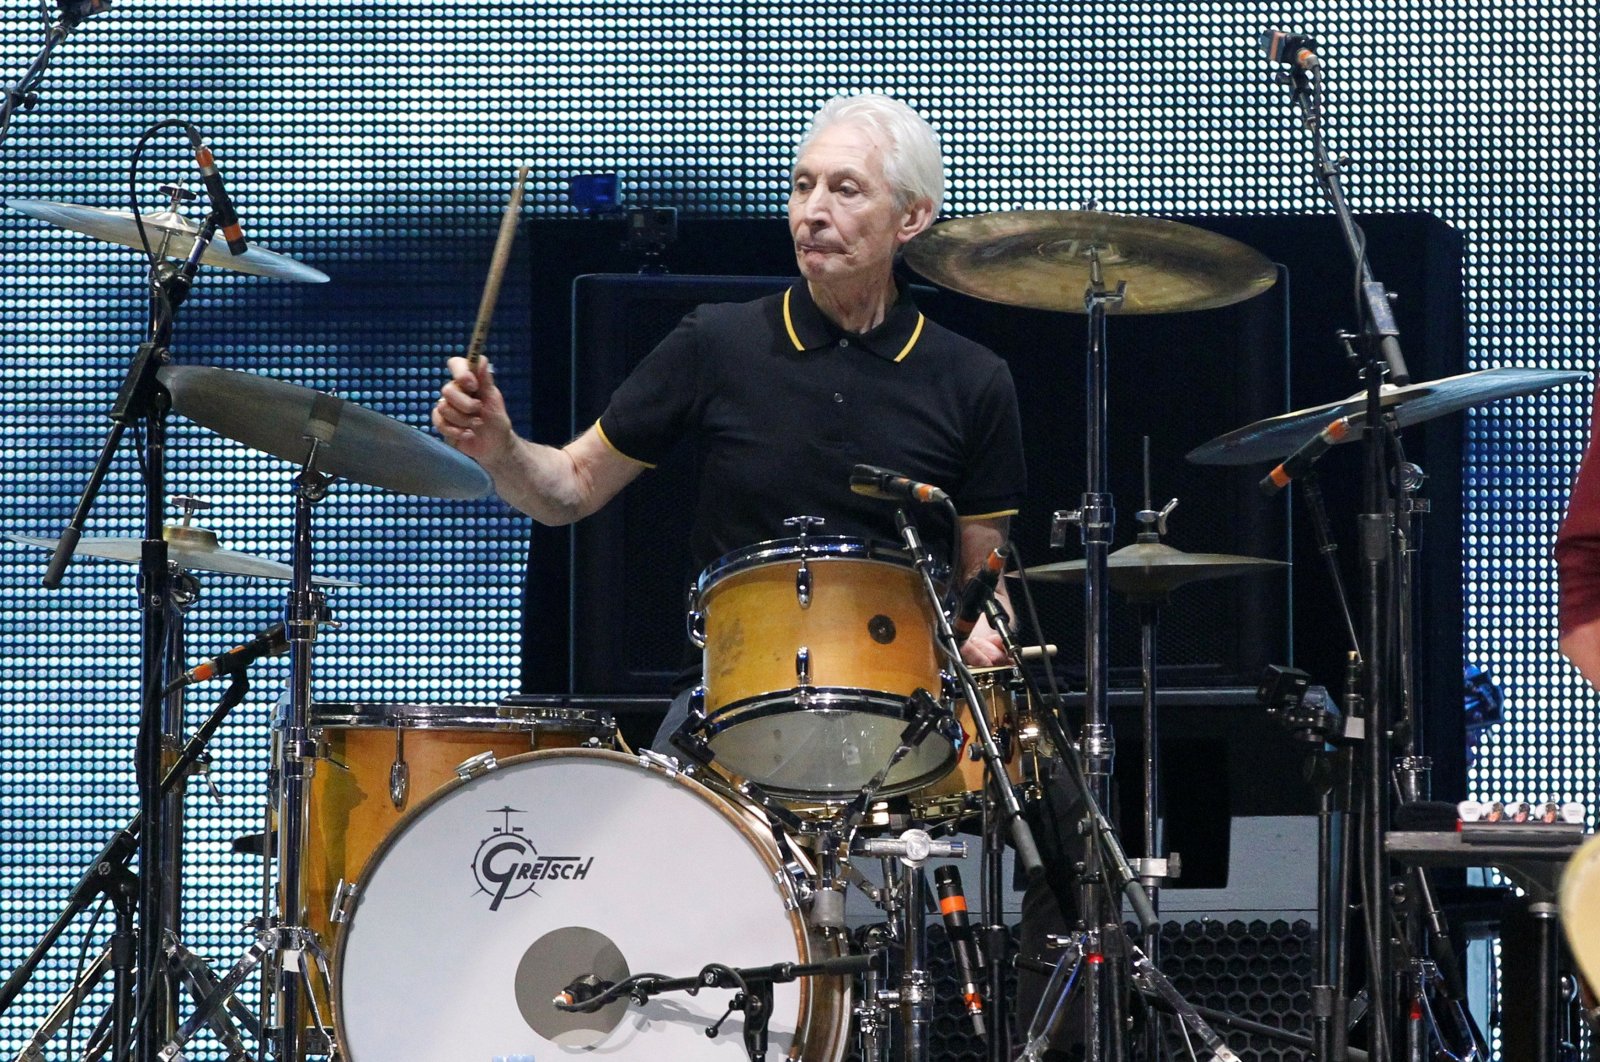 Charlie Watts of British band The Rolling Stones performs during the opening night of their "50 & Counting" worldwide tour at Staples Center in Los Angeles, California, U.S., May 3, 2013. (REUTERS Photo)